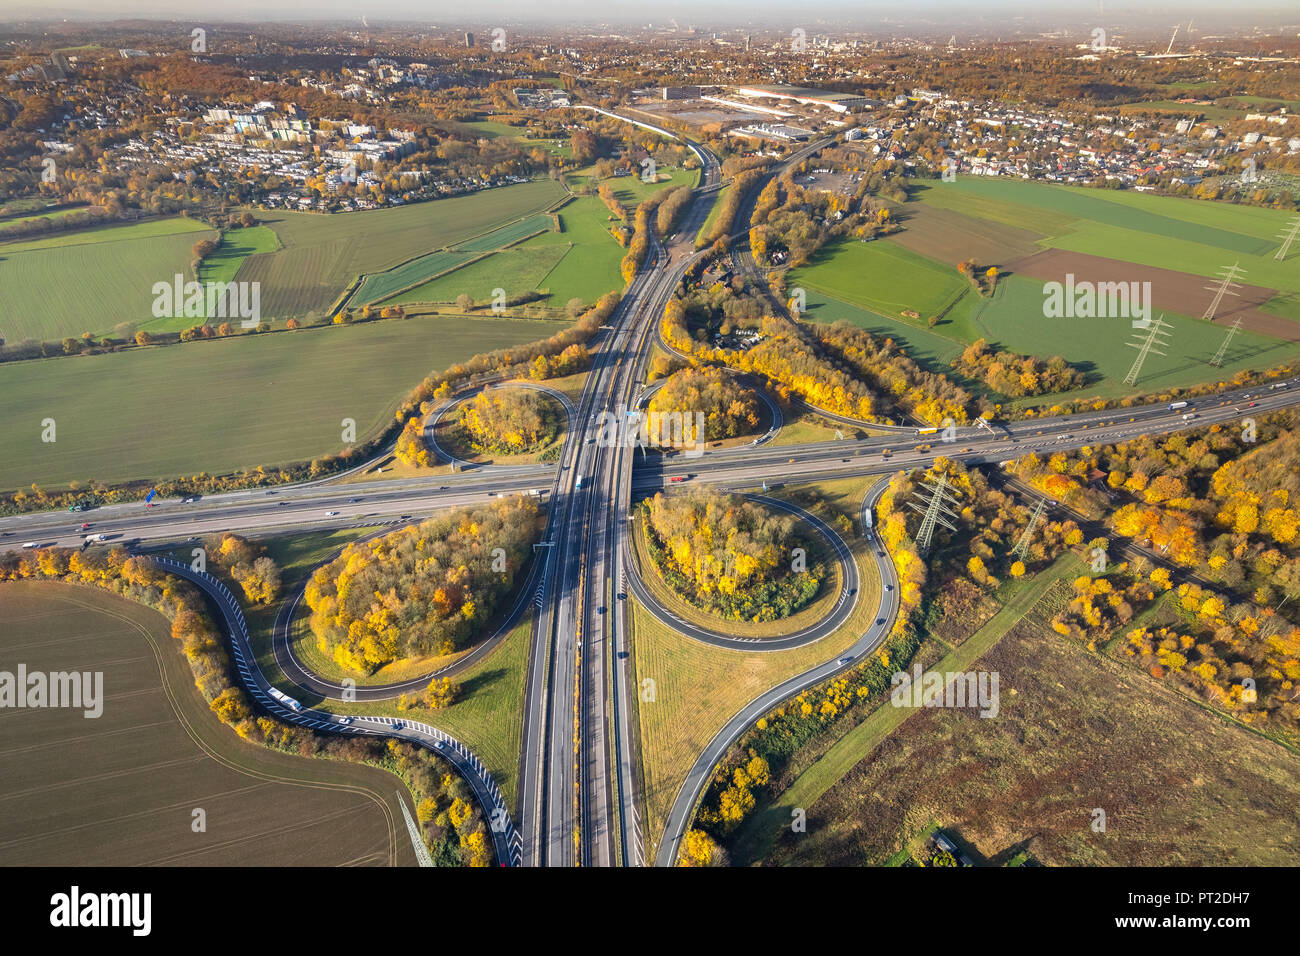 future commercial area at the interchange A43 and A448 Intersection Querenburg, Bochum, Ruhr area, North Rhine-Westphalia, Germany Stock Photo